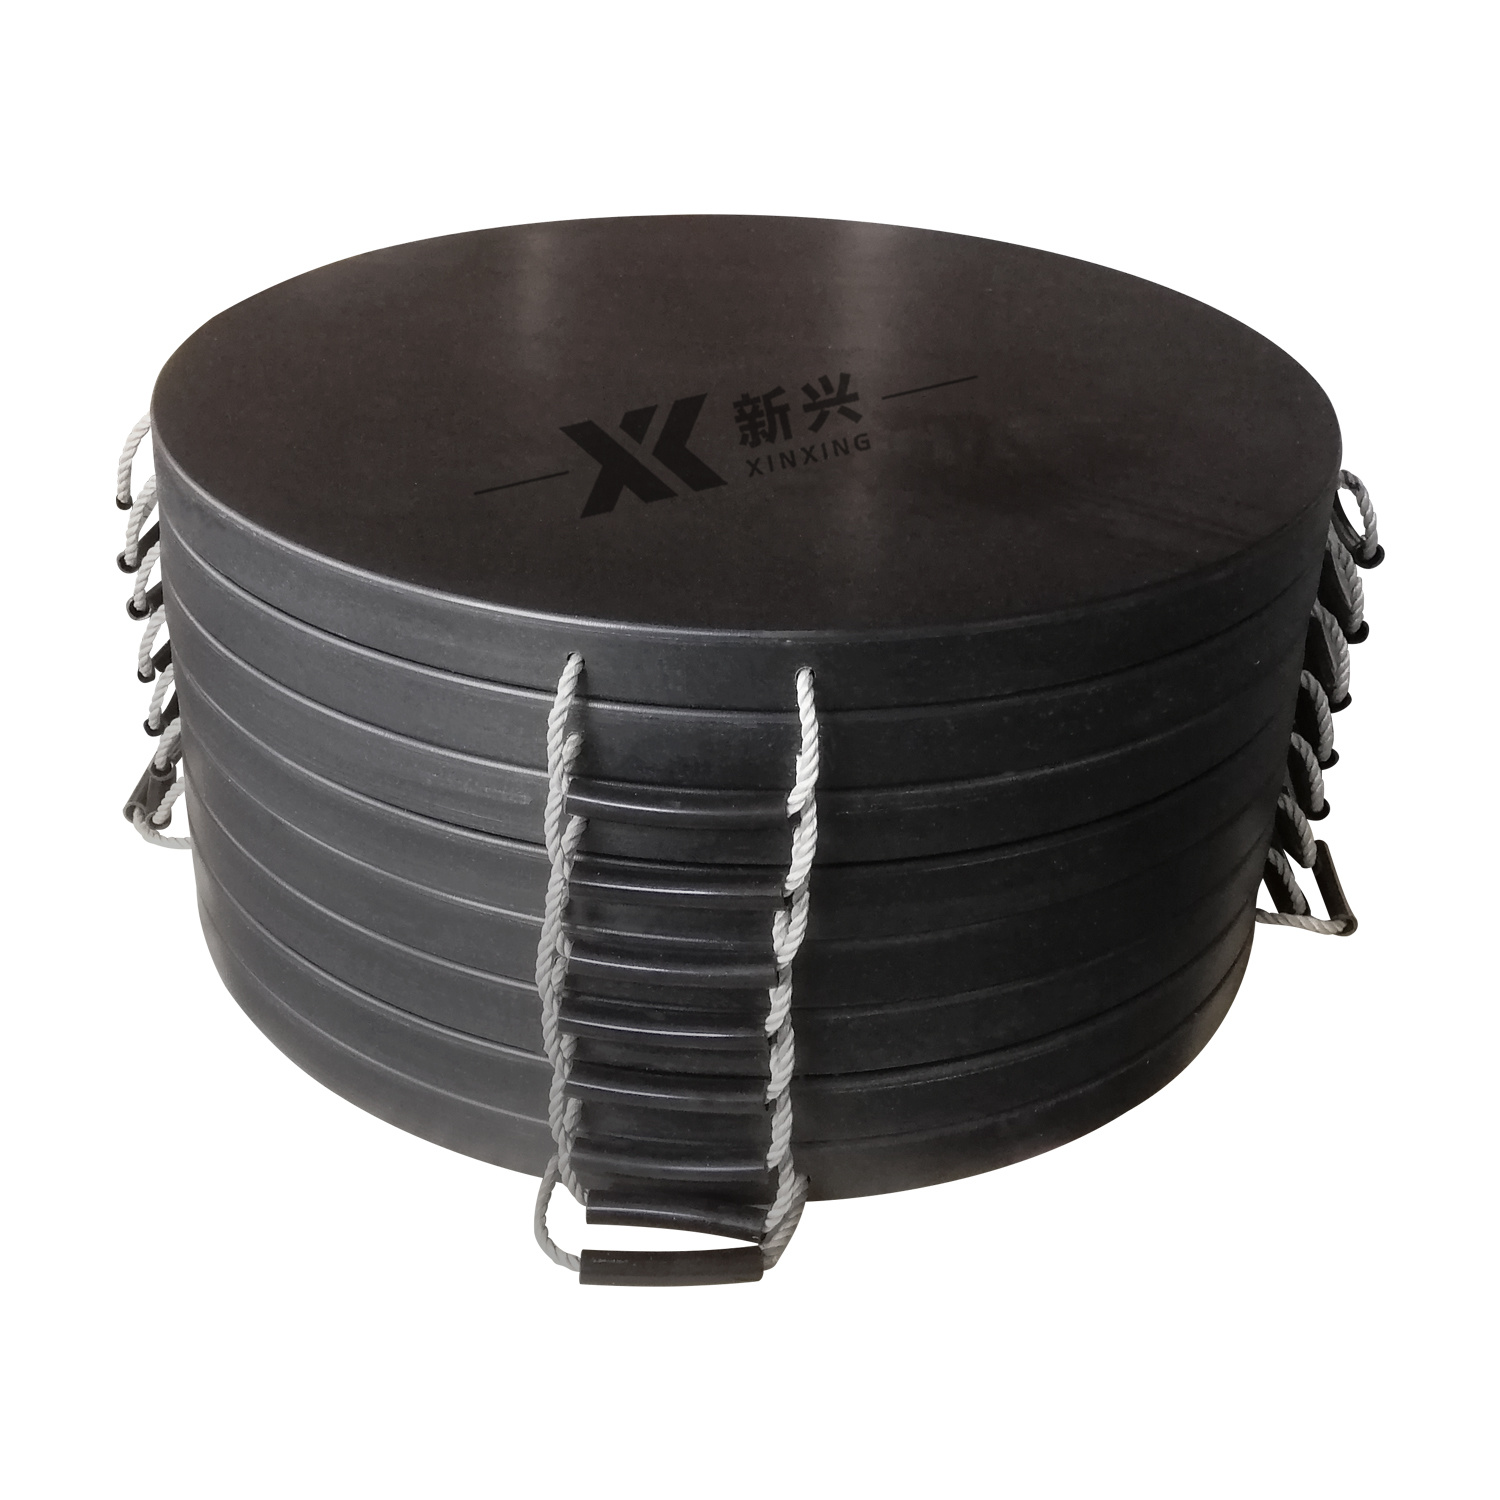 Black round UHMWPE wear resisting Crane outrigger pads